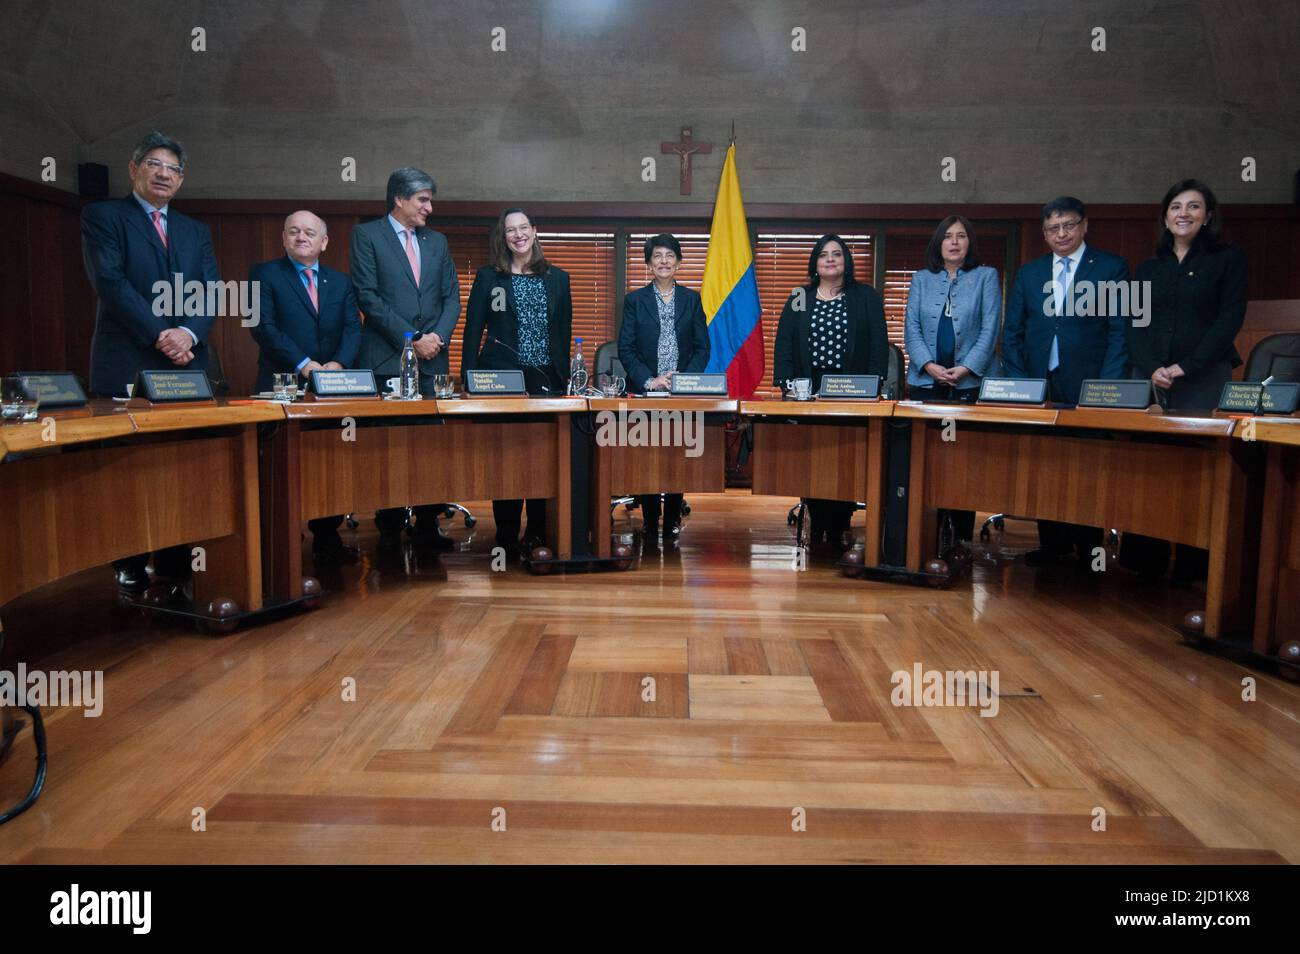 A general view of Colombia's Constitutional Court Magistrates posing during a photocall event with the Constituional Court magistrates in Bogota, Colo Stock Photo